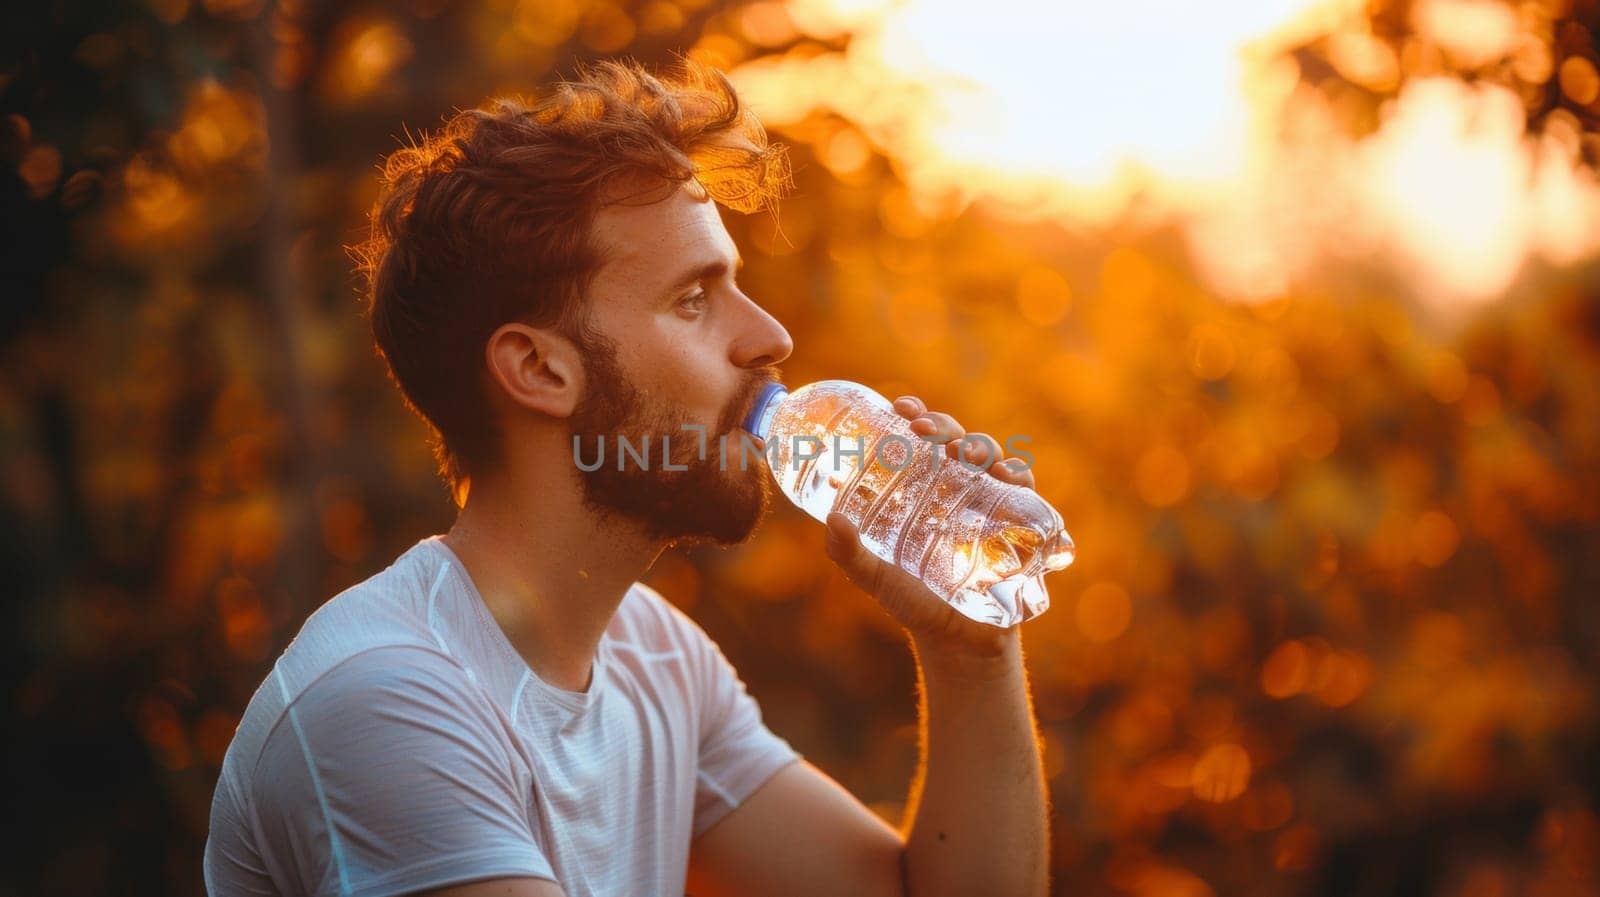 A man drinking water from a bottle while sitting outside